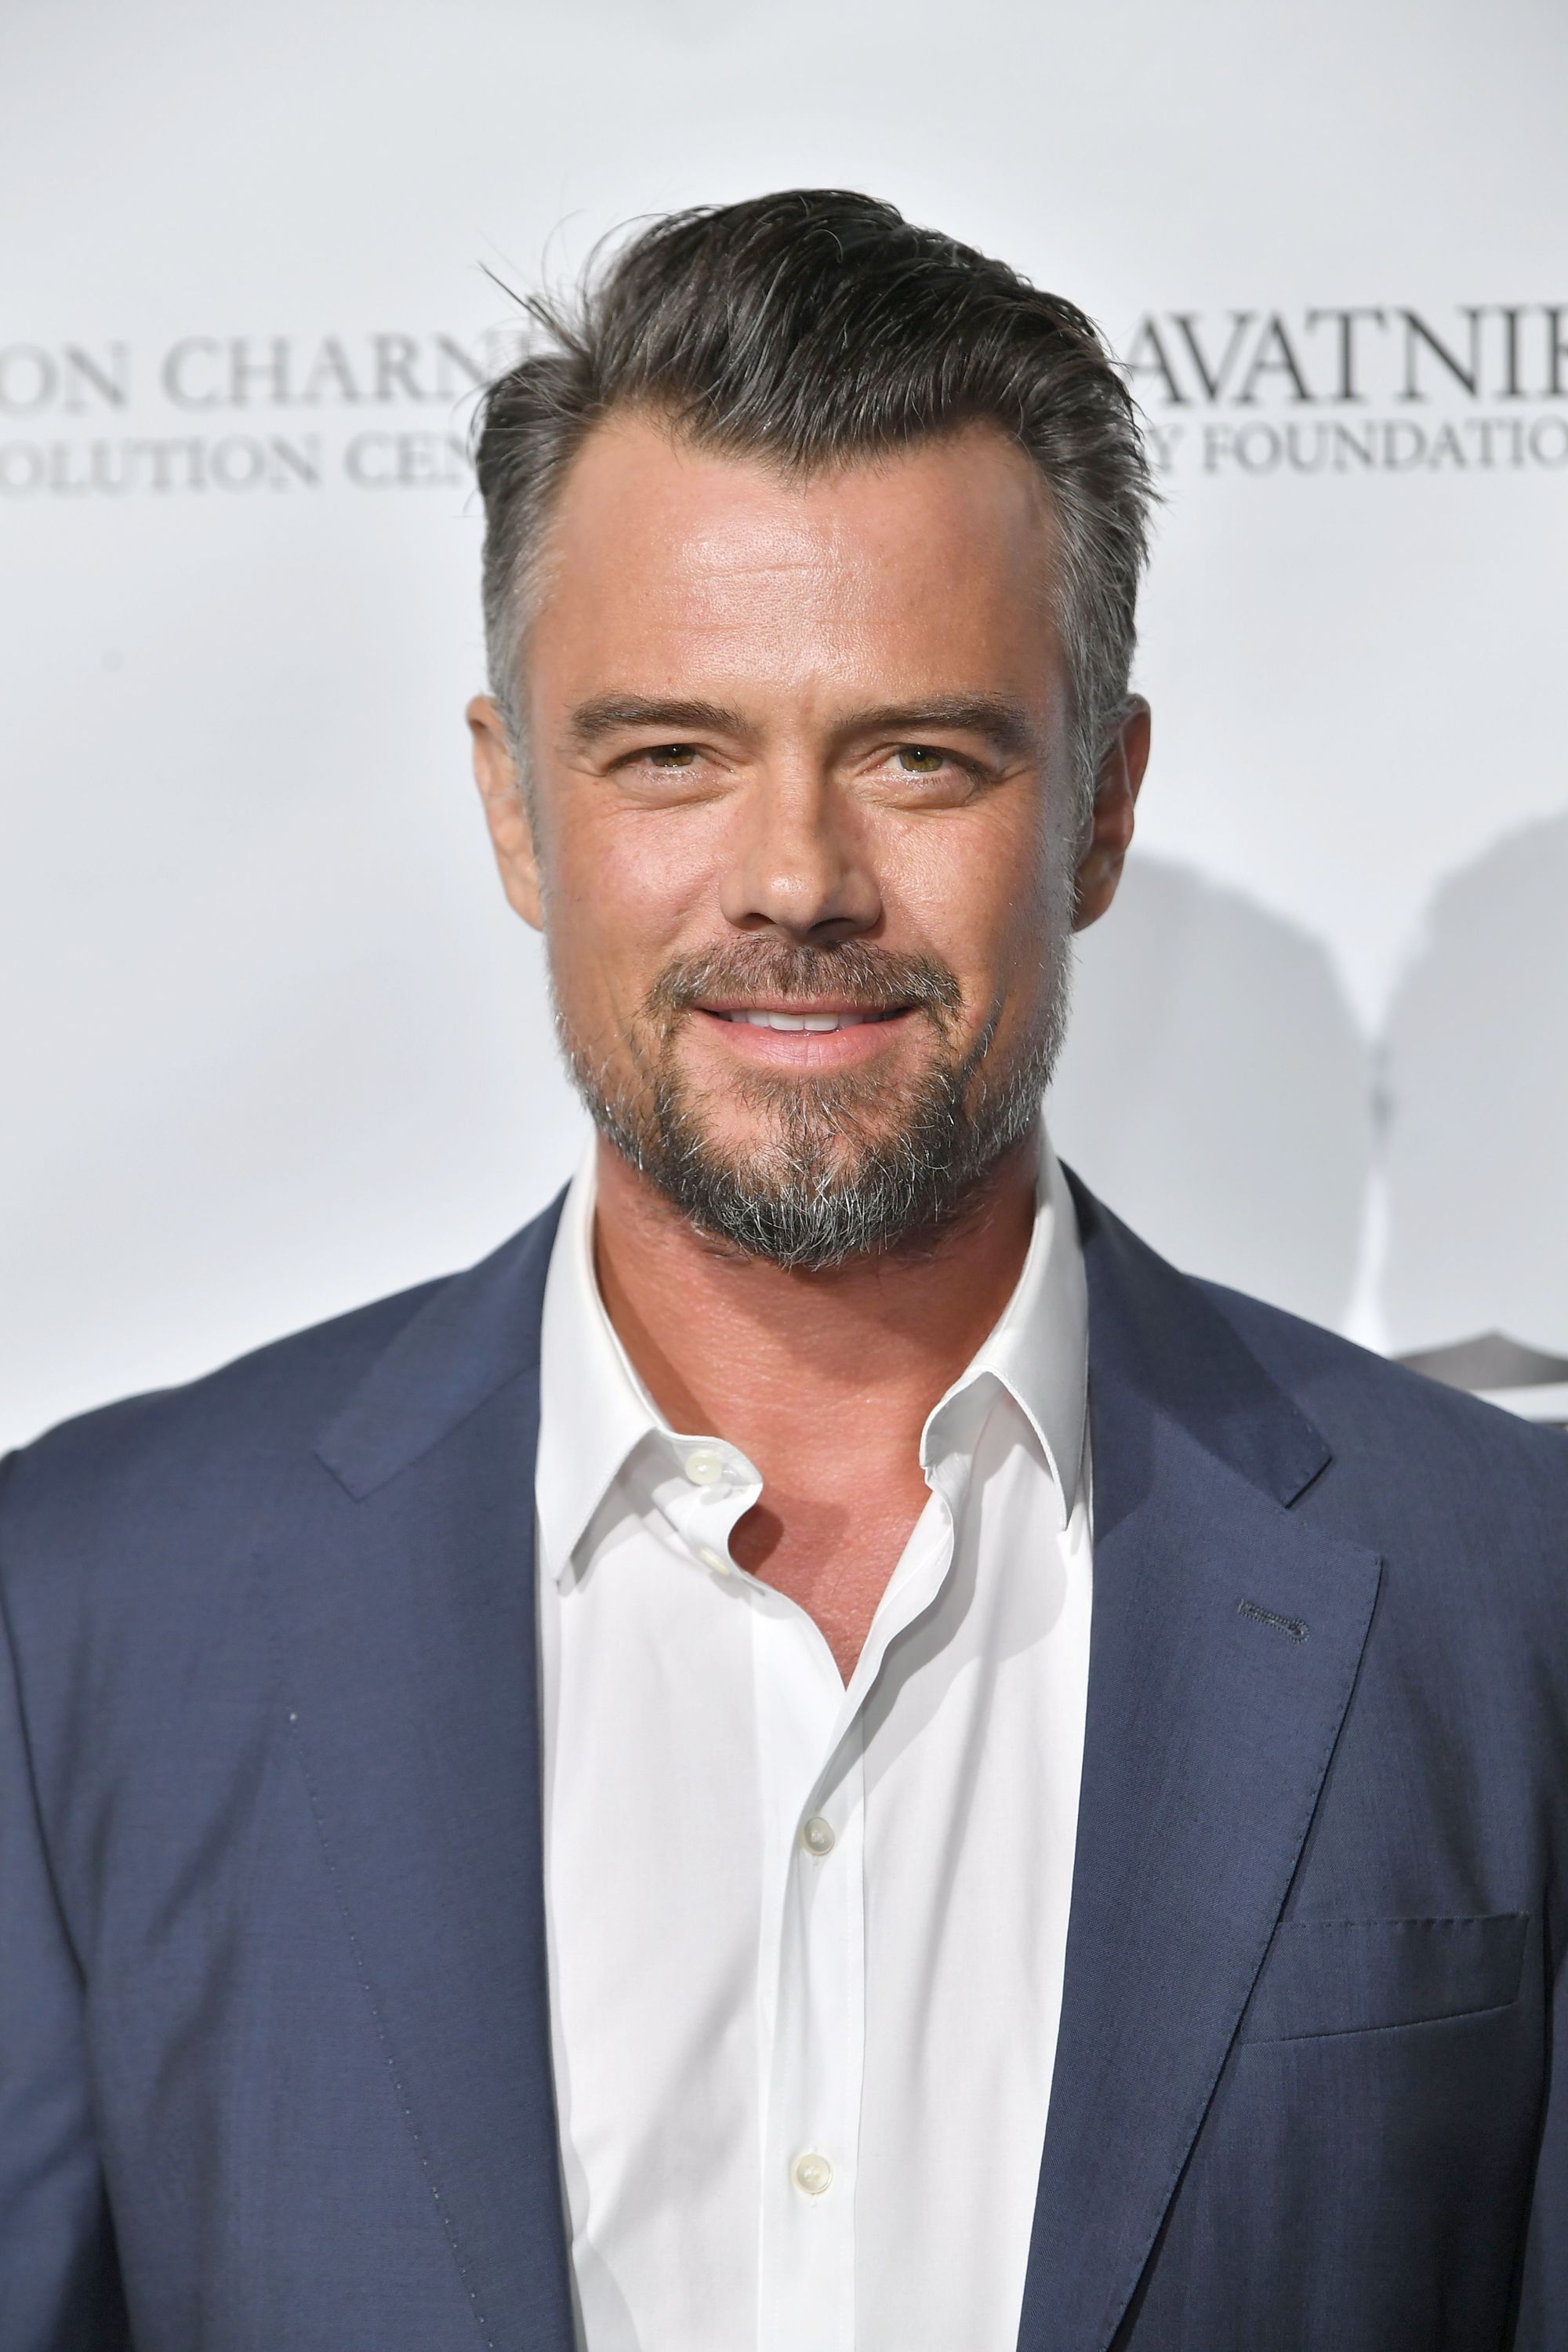 Hairstyles for men over 40: Photo of Josh Duhamel with dark grey side parted brush back hair